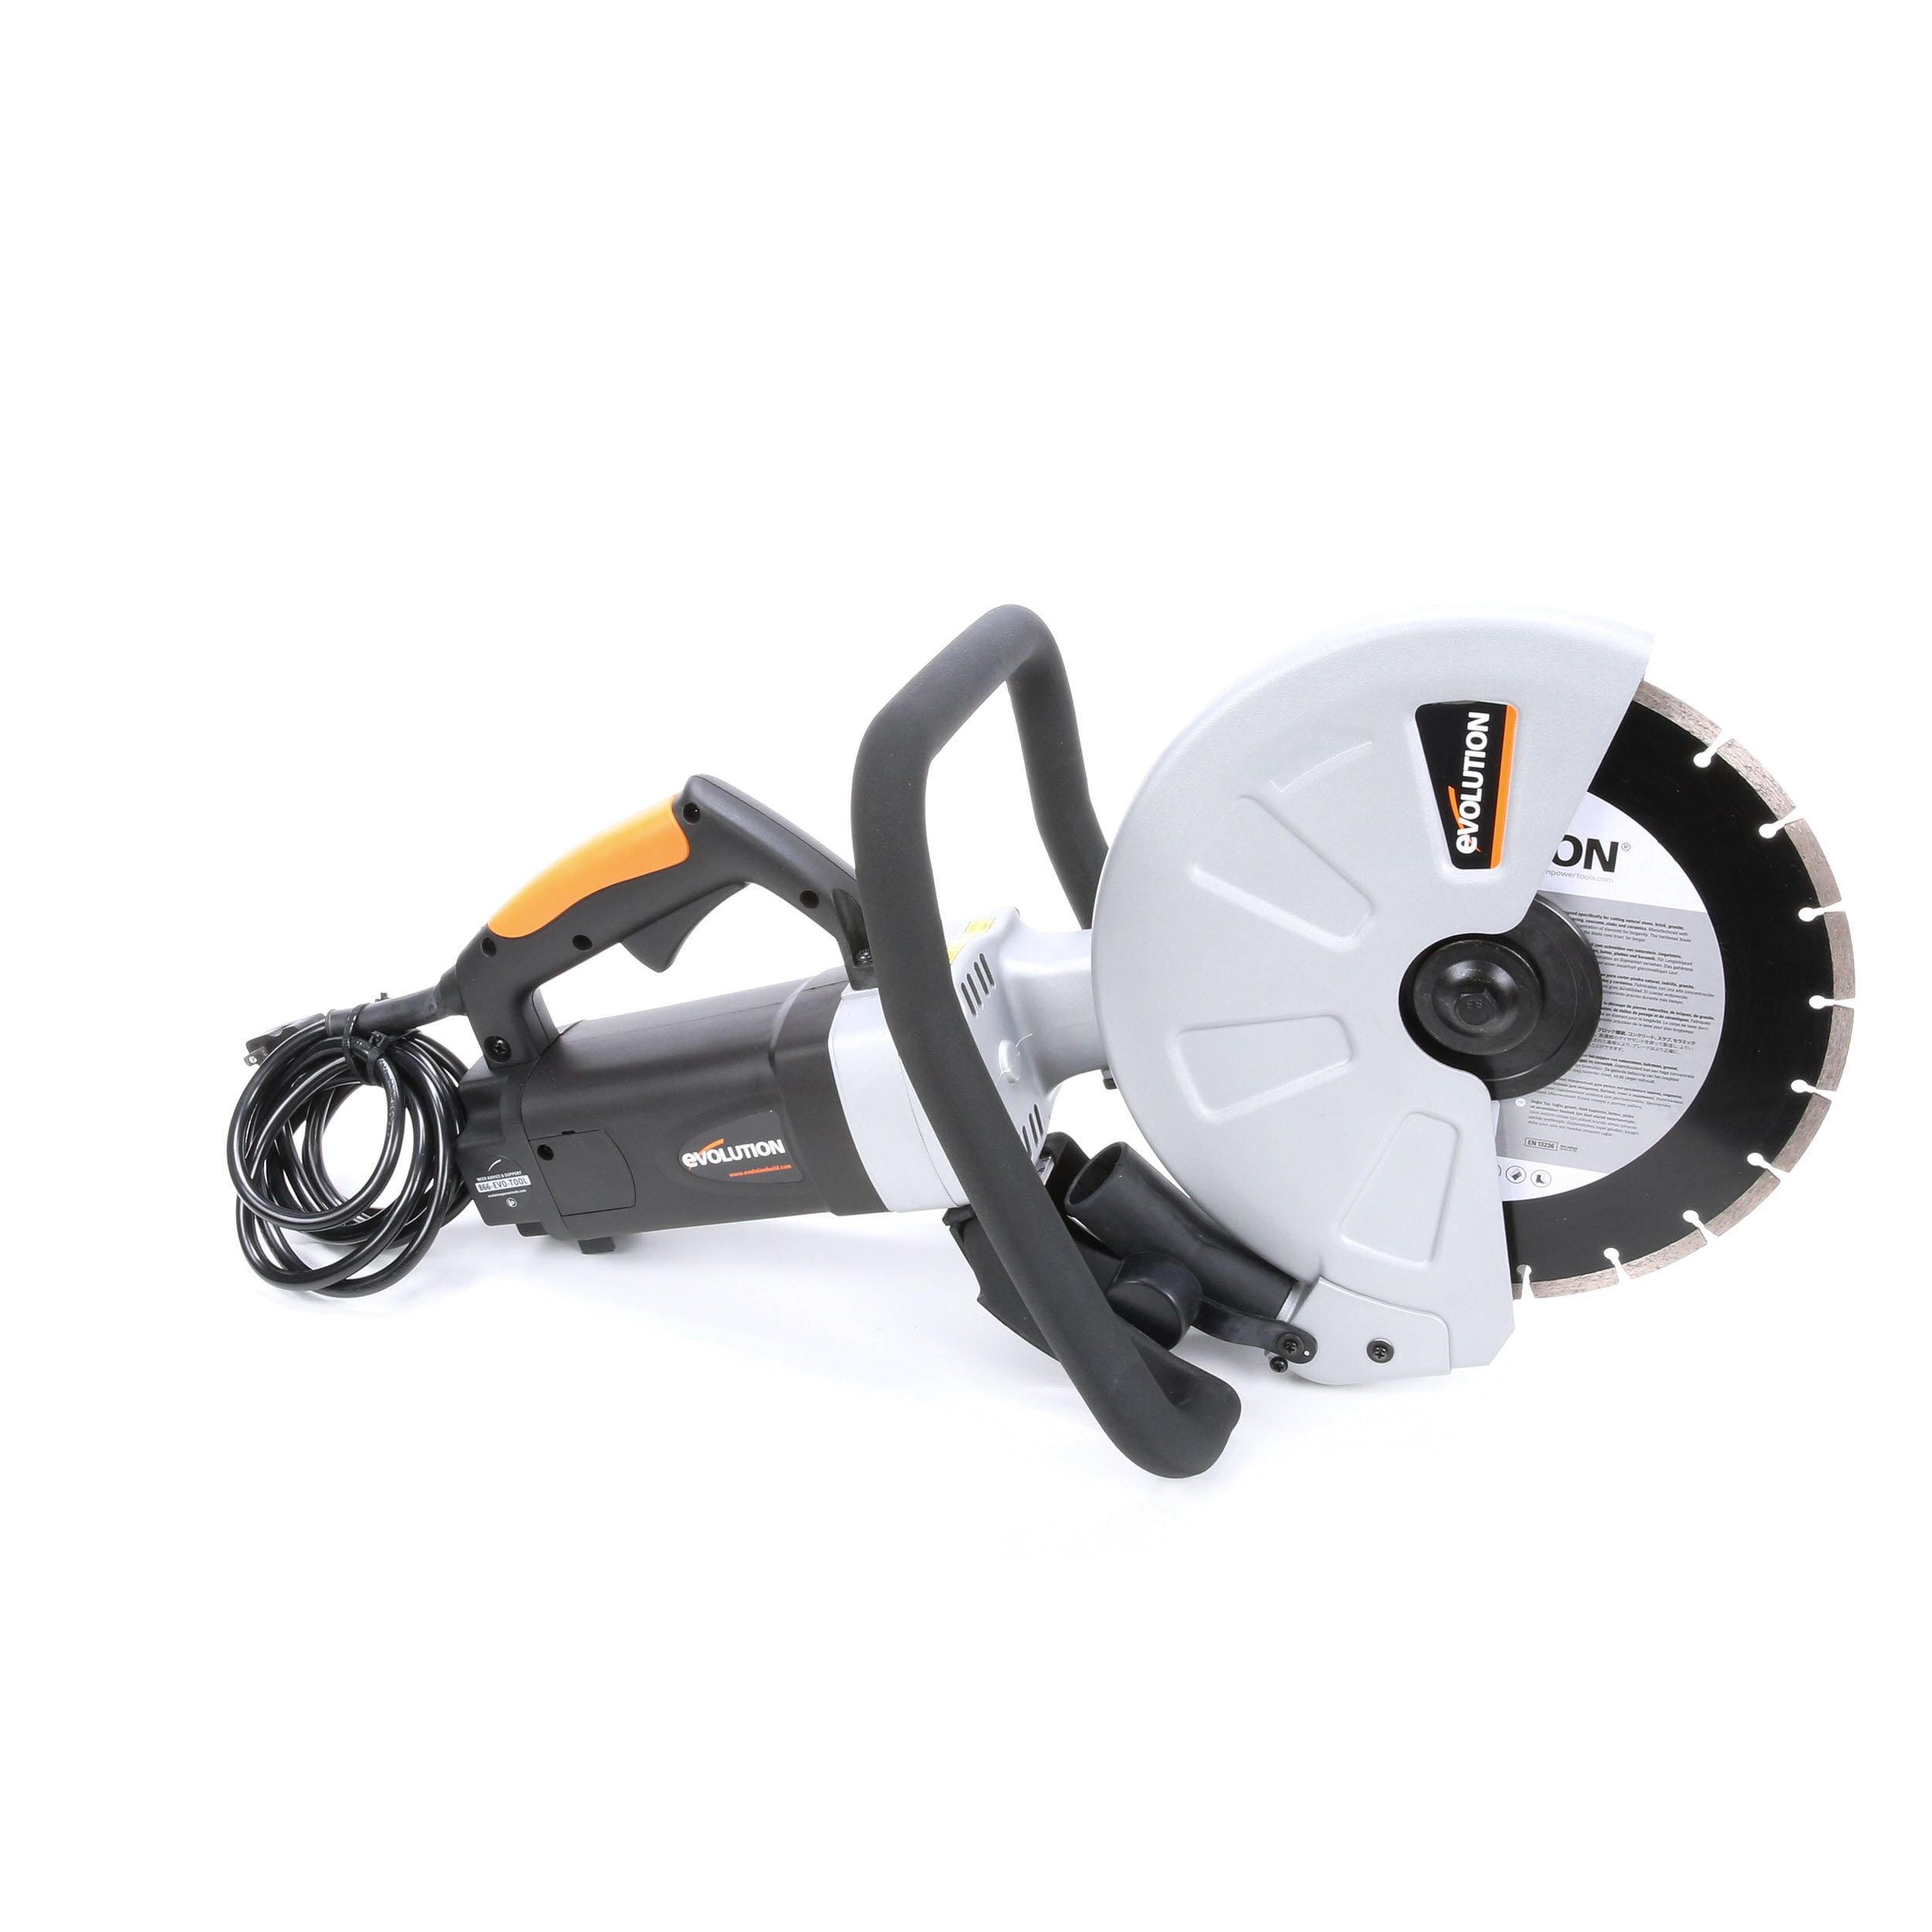 Evolution 008-0001 2400W Electric Concrete Saw, 305 Mm 230 VOLT NOT FOR USA 